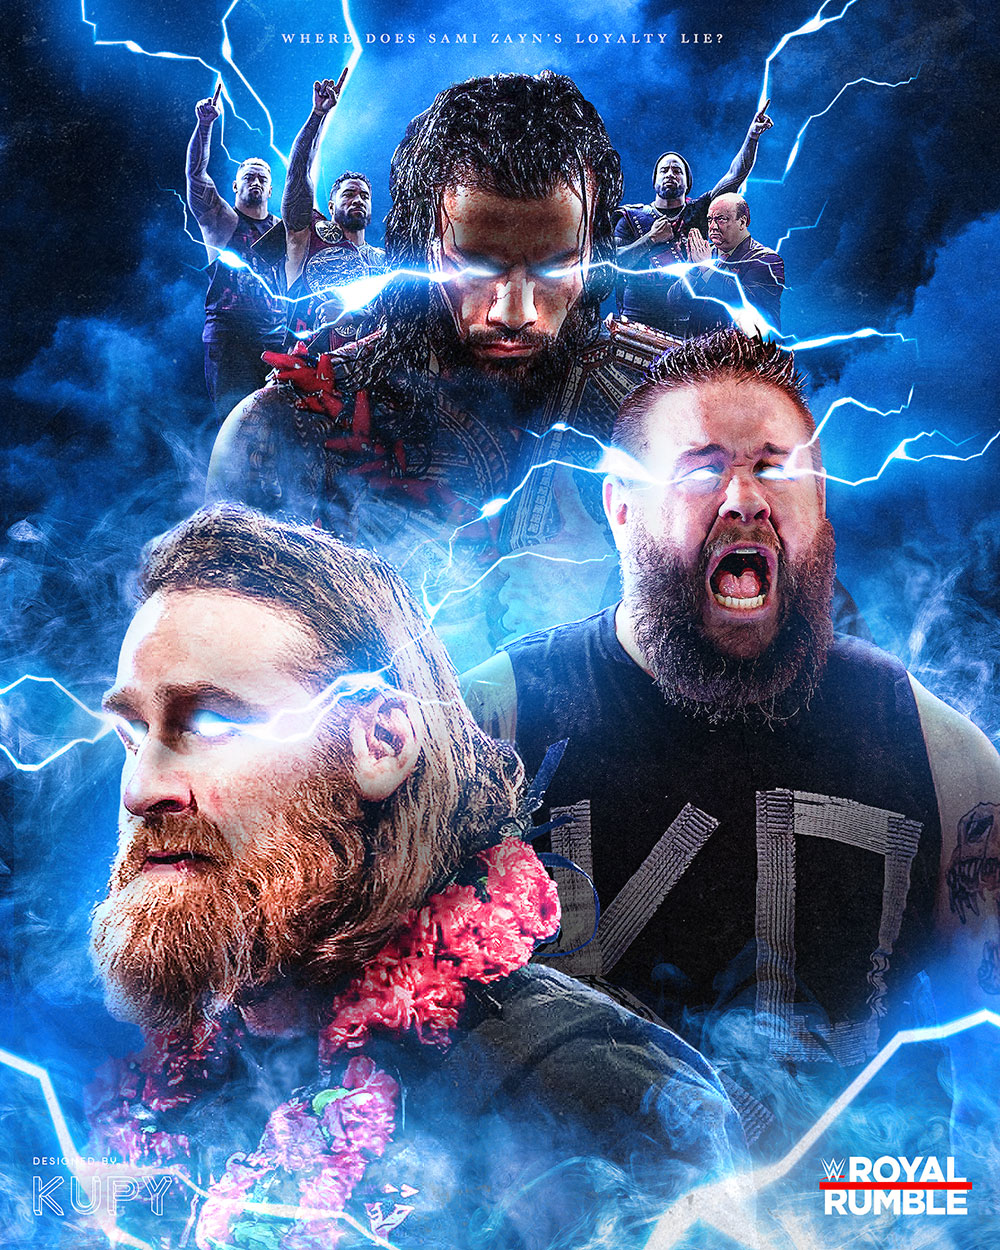 Kupy Wrestling Wallpapers - The latest source for your WWE wrestling  wallpaper needs! Mobile, HD and 4k resolutions available!